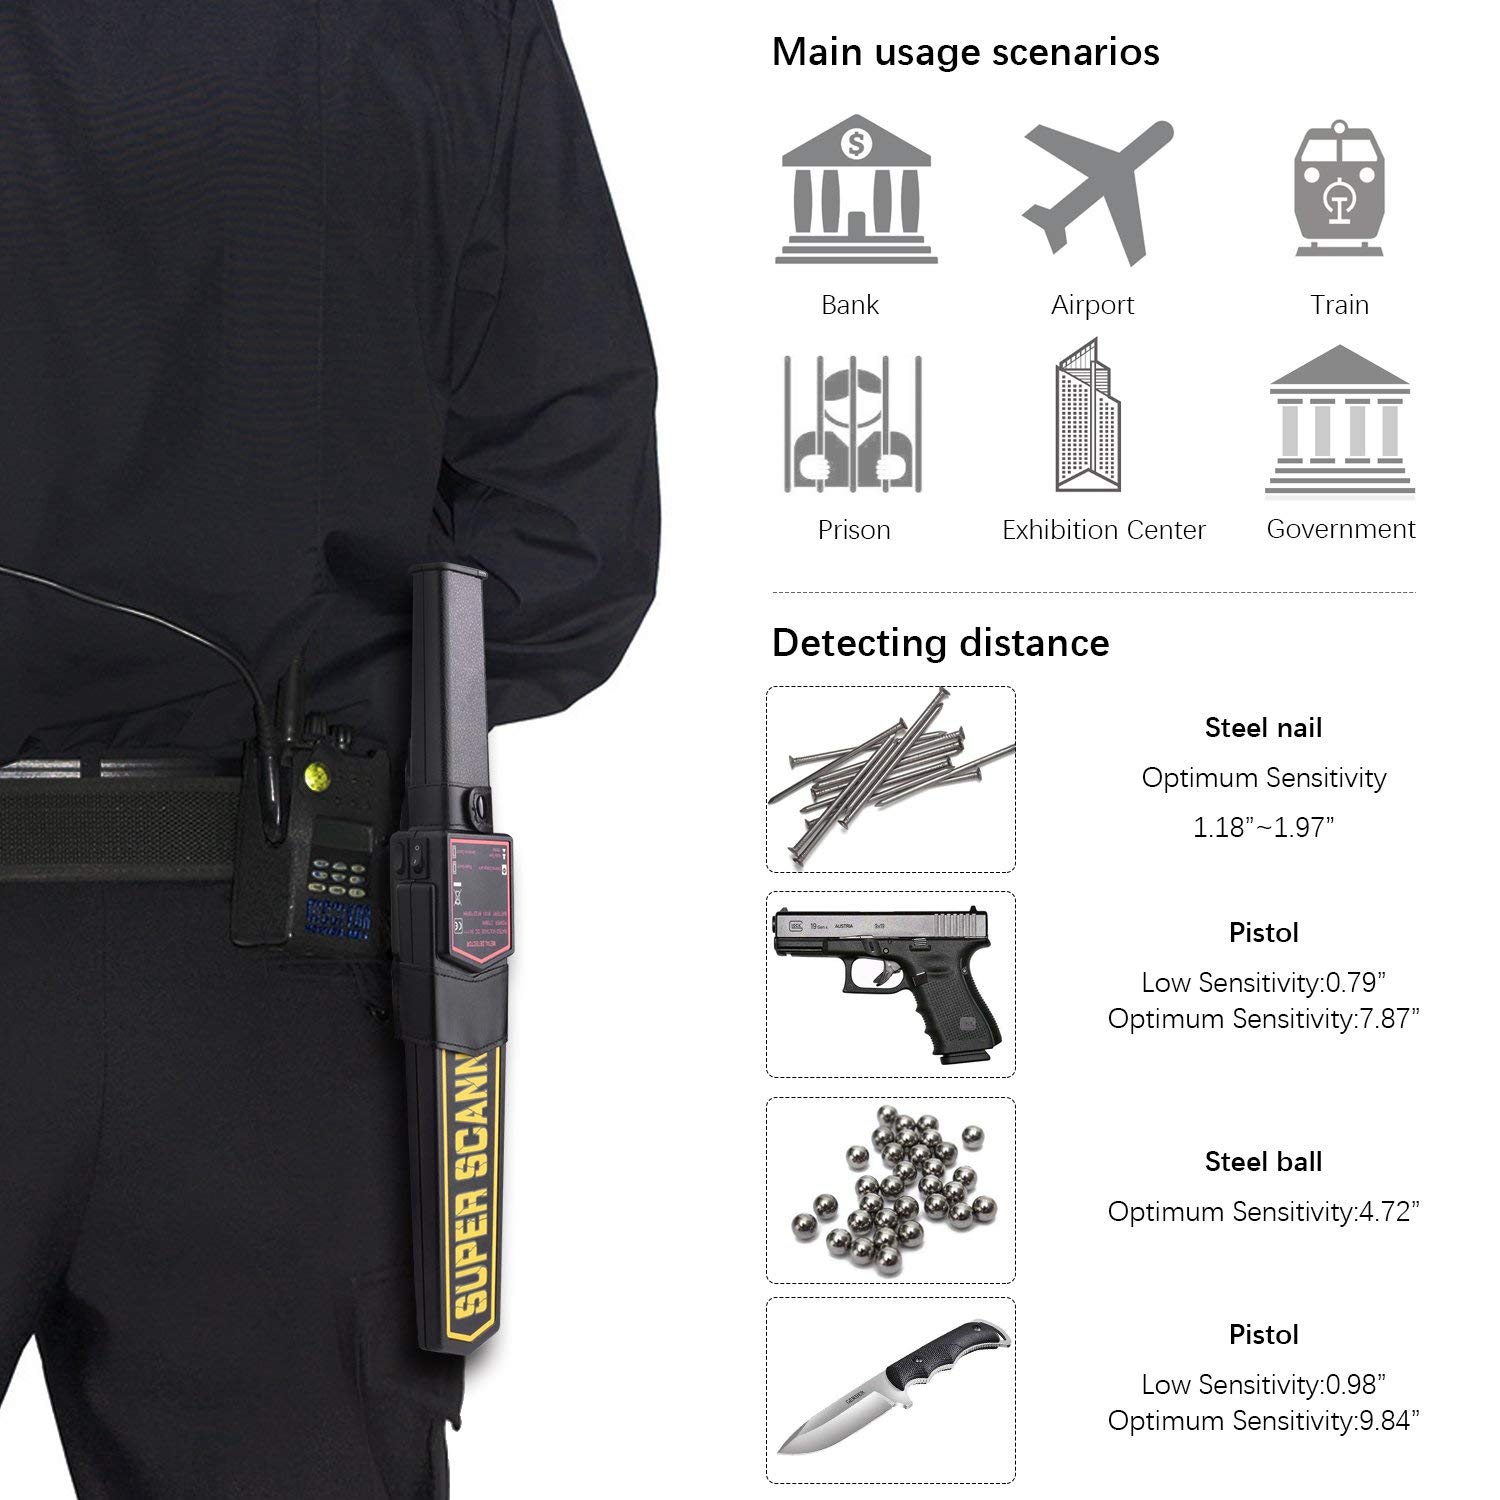 MD3003B1 Hand Held Metal Detector Wand Security Scanner with 9V Battery, Belt Holster, Adjustable Sensitivity, Optional Sound & Vibration Modes for Airport, Open Port, Frontier, Company Entrance